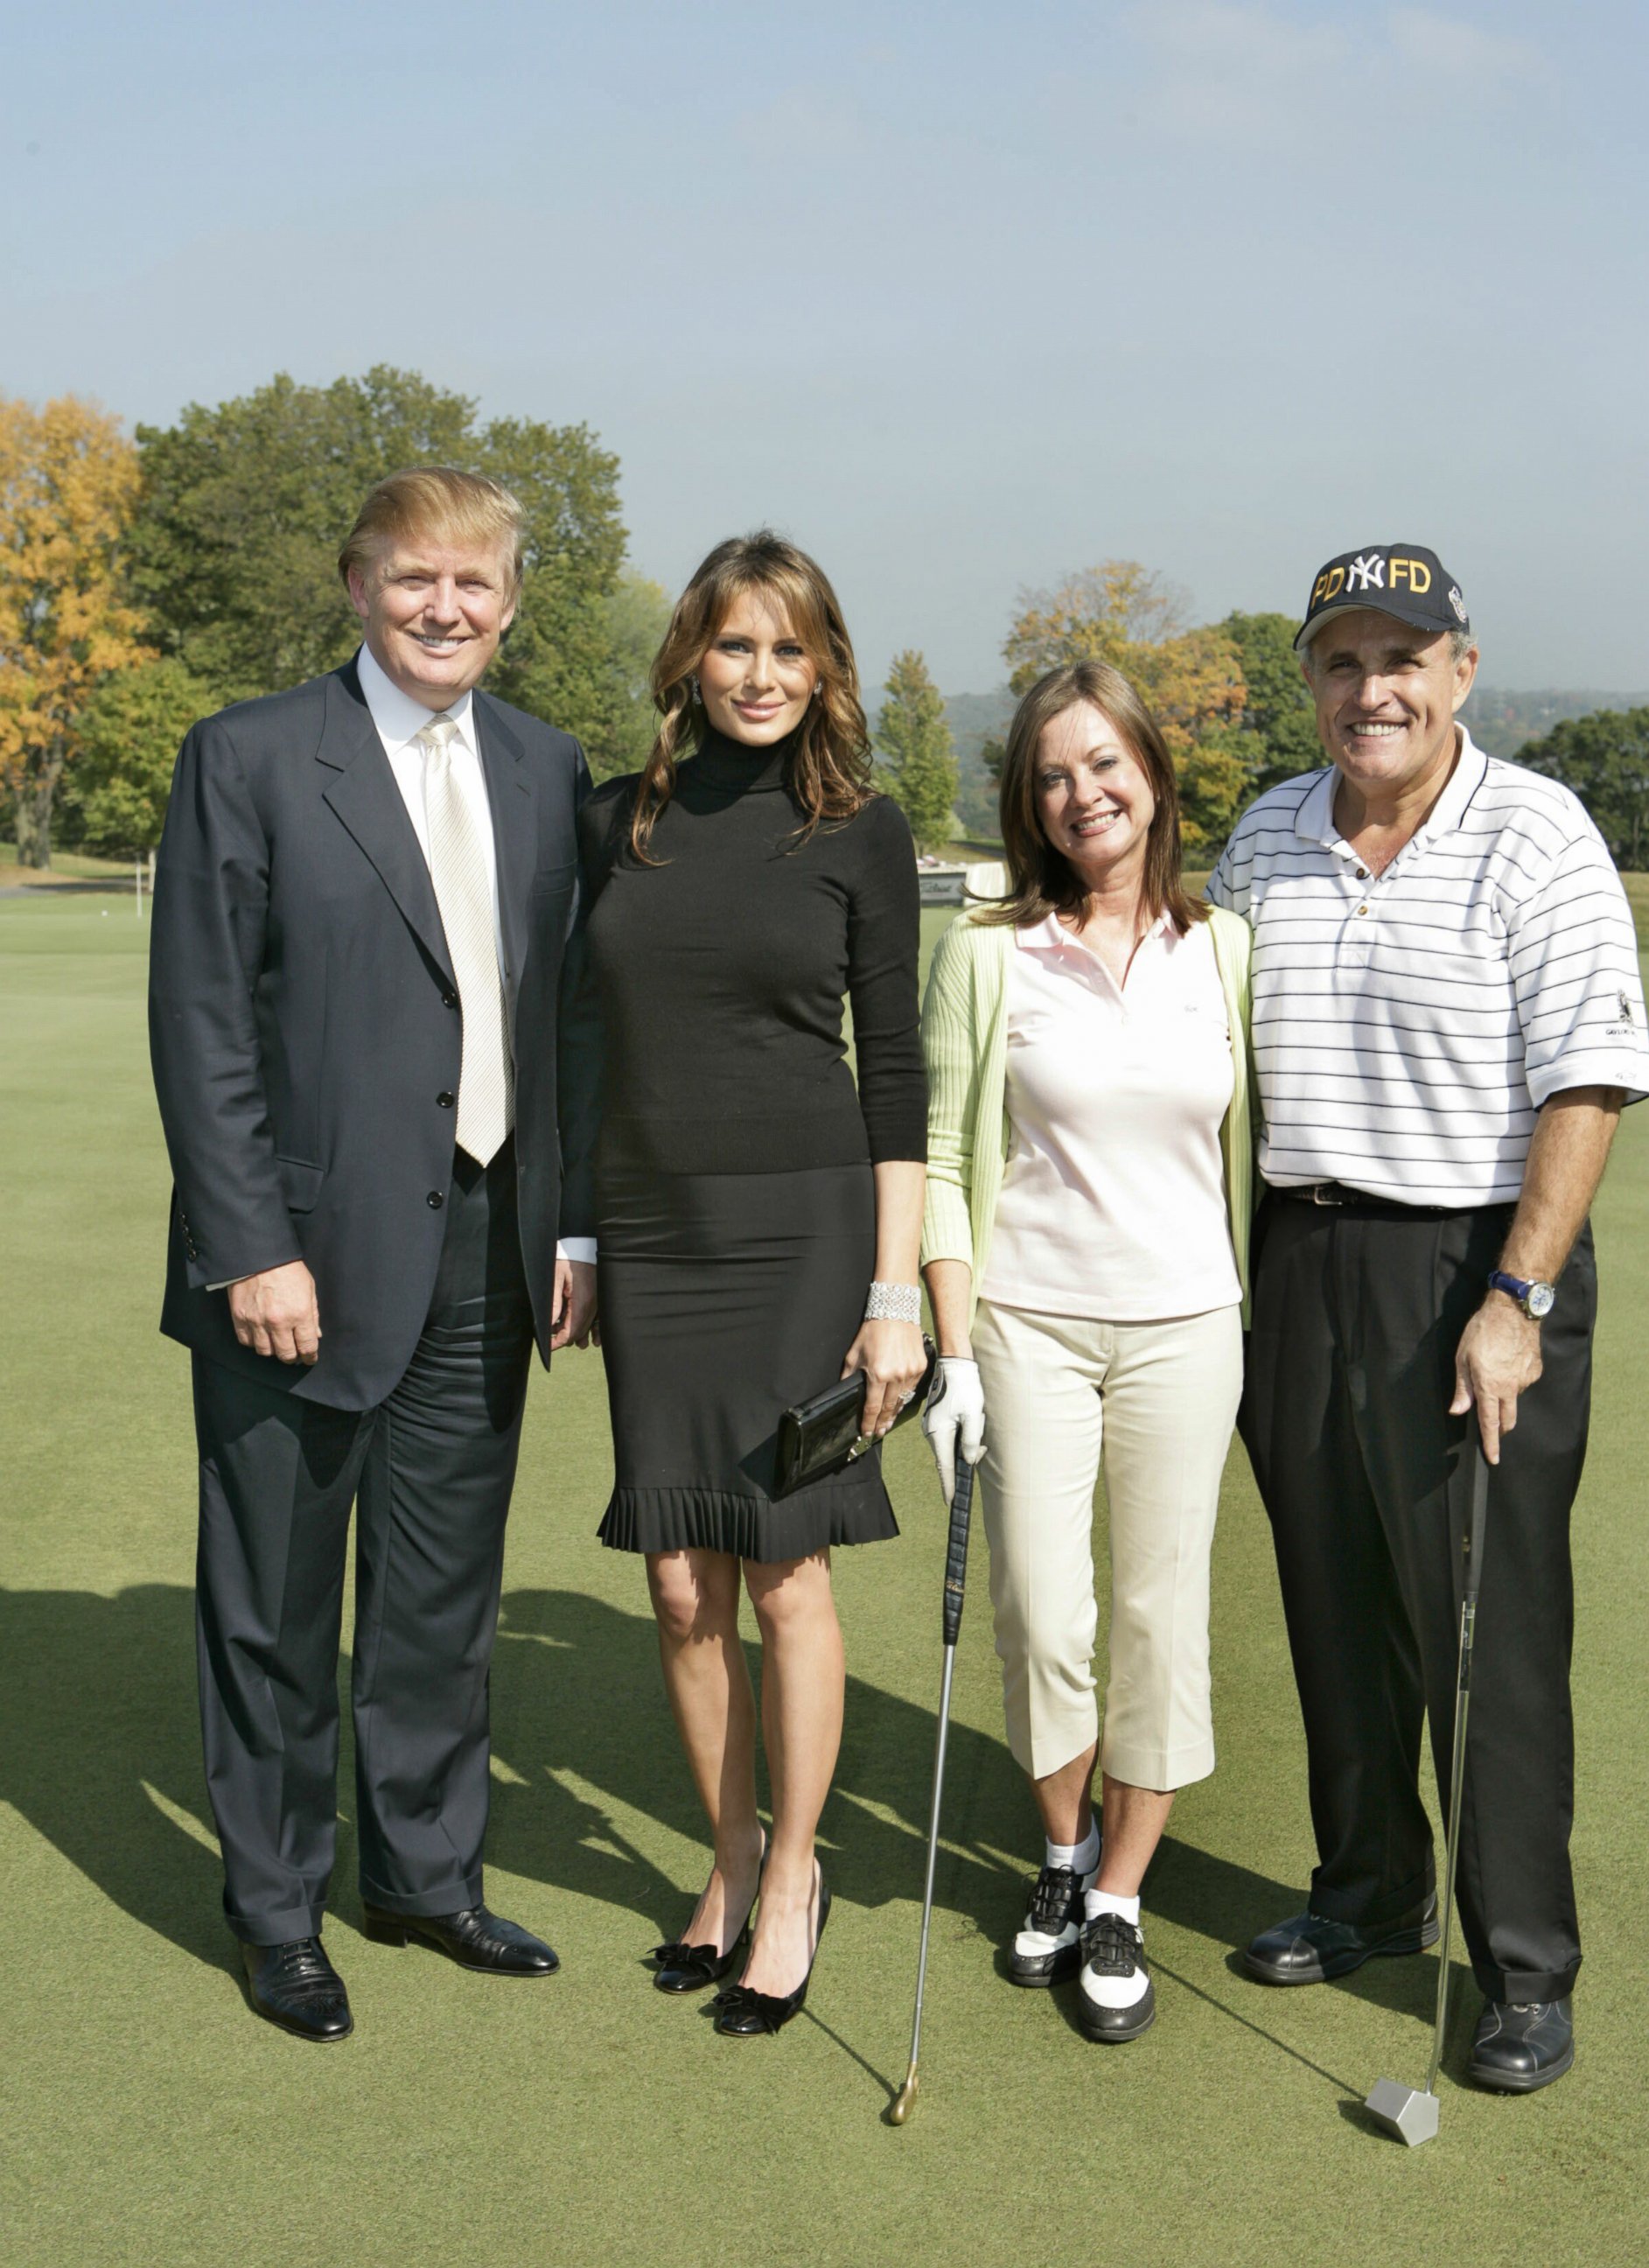 PHOTO: Donald Trump, Melania Trump, Judith Giuliani and Rudy Giuliani host a charity golf tournament at the Trump National Golf Course in Westchester, New York, on Oct. 7, 2005. 